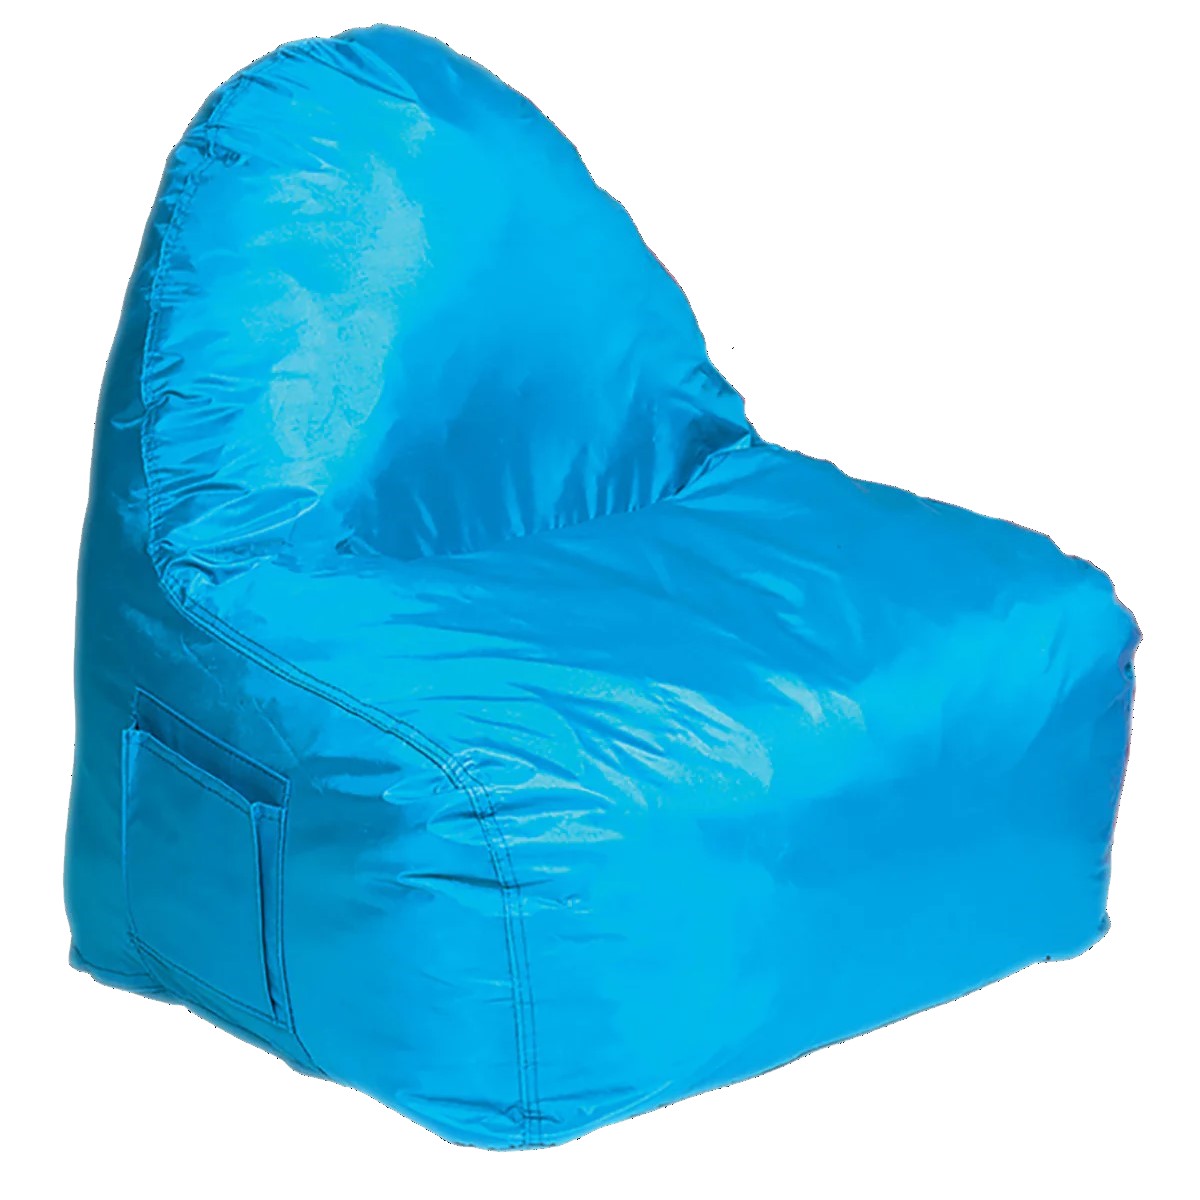 Chill-Out Chair Elizabeth Richards